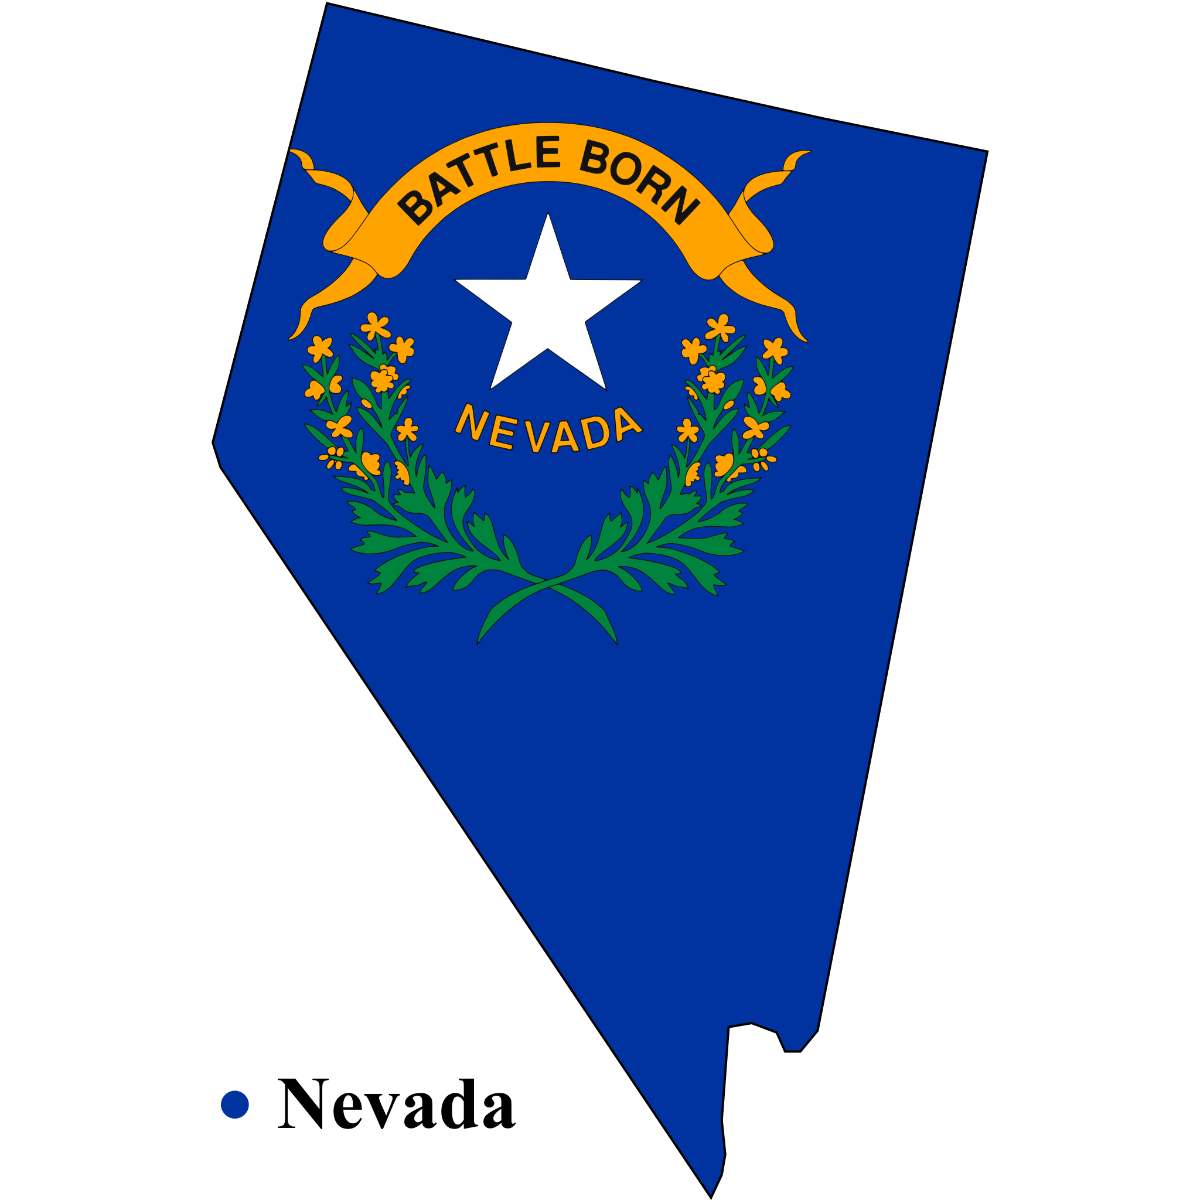 Nevada State map cutout with Nevada flag superimposed